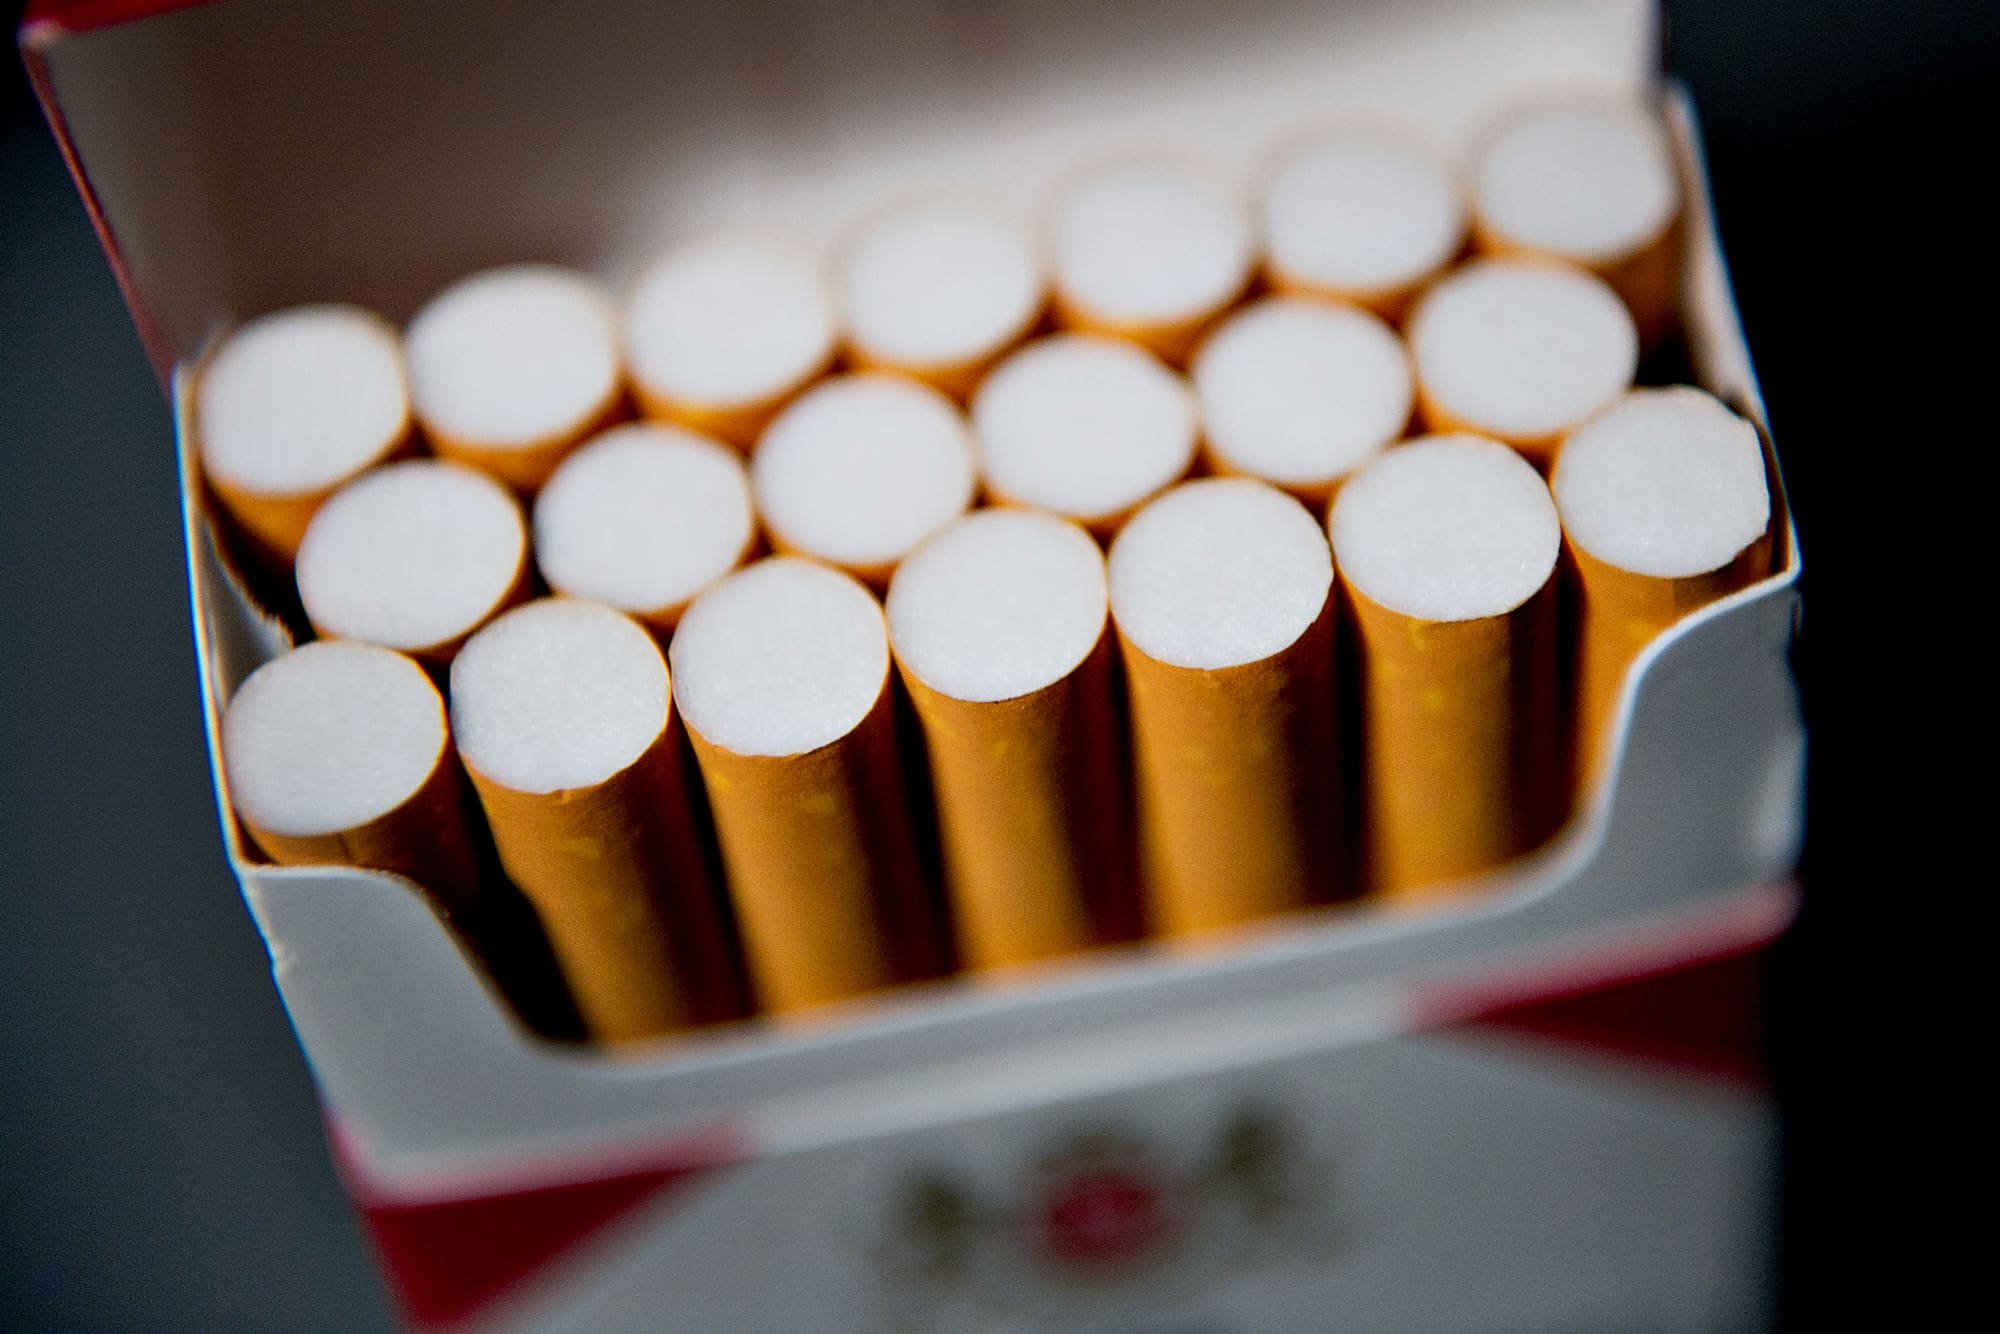 Tobacco supply drops due to report Biden plans to curb cigarette nicotine